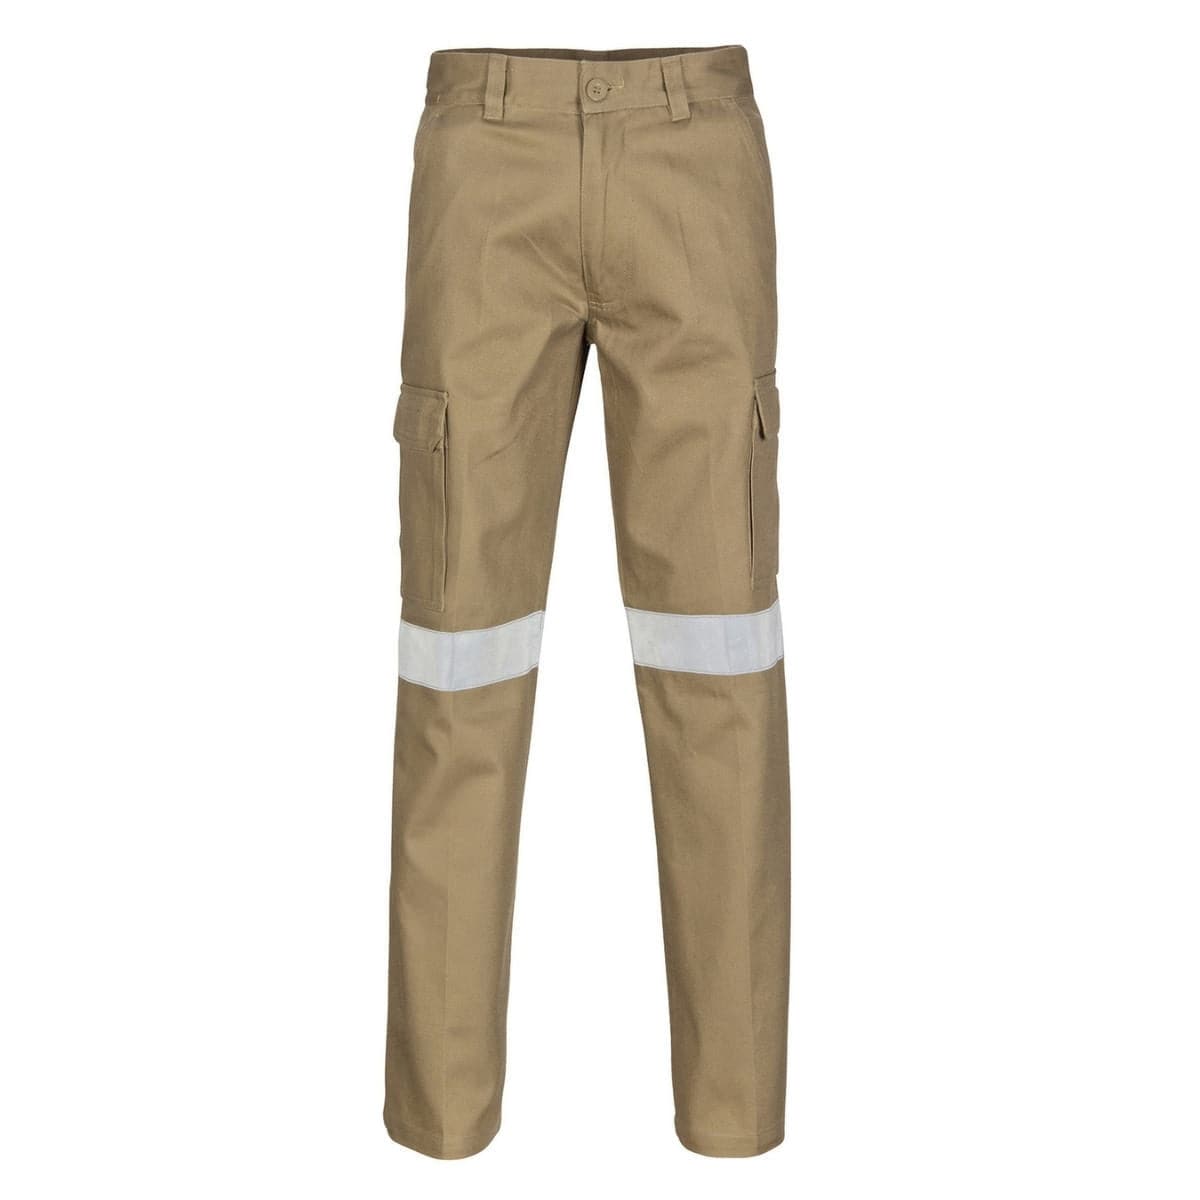 DNC Cotton Drill Cargo Pants With 3M Reflective Tape 3319